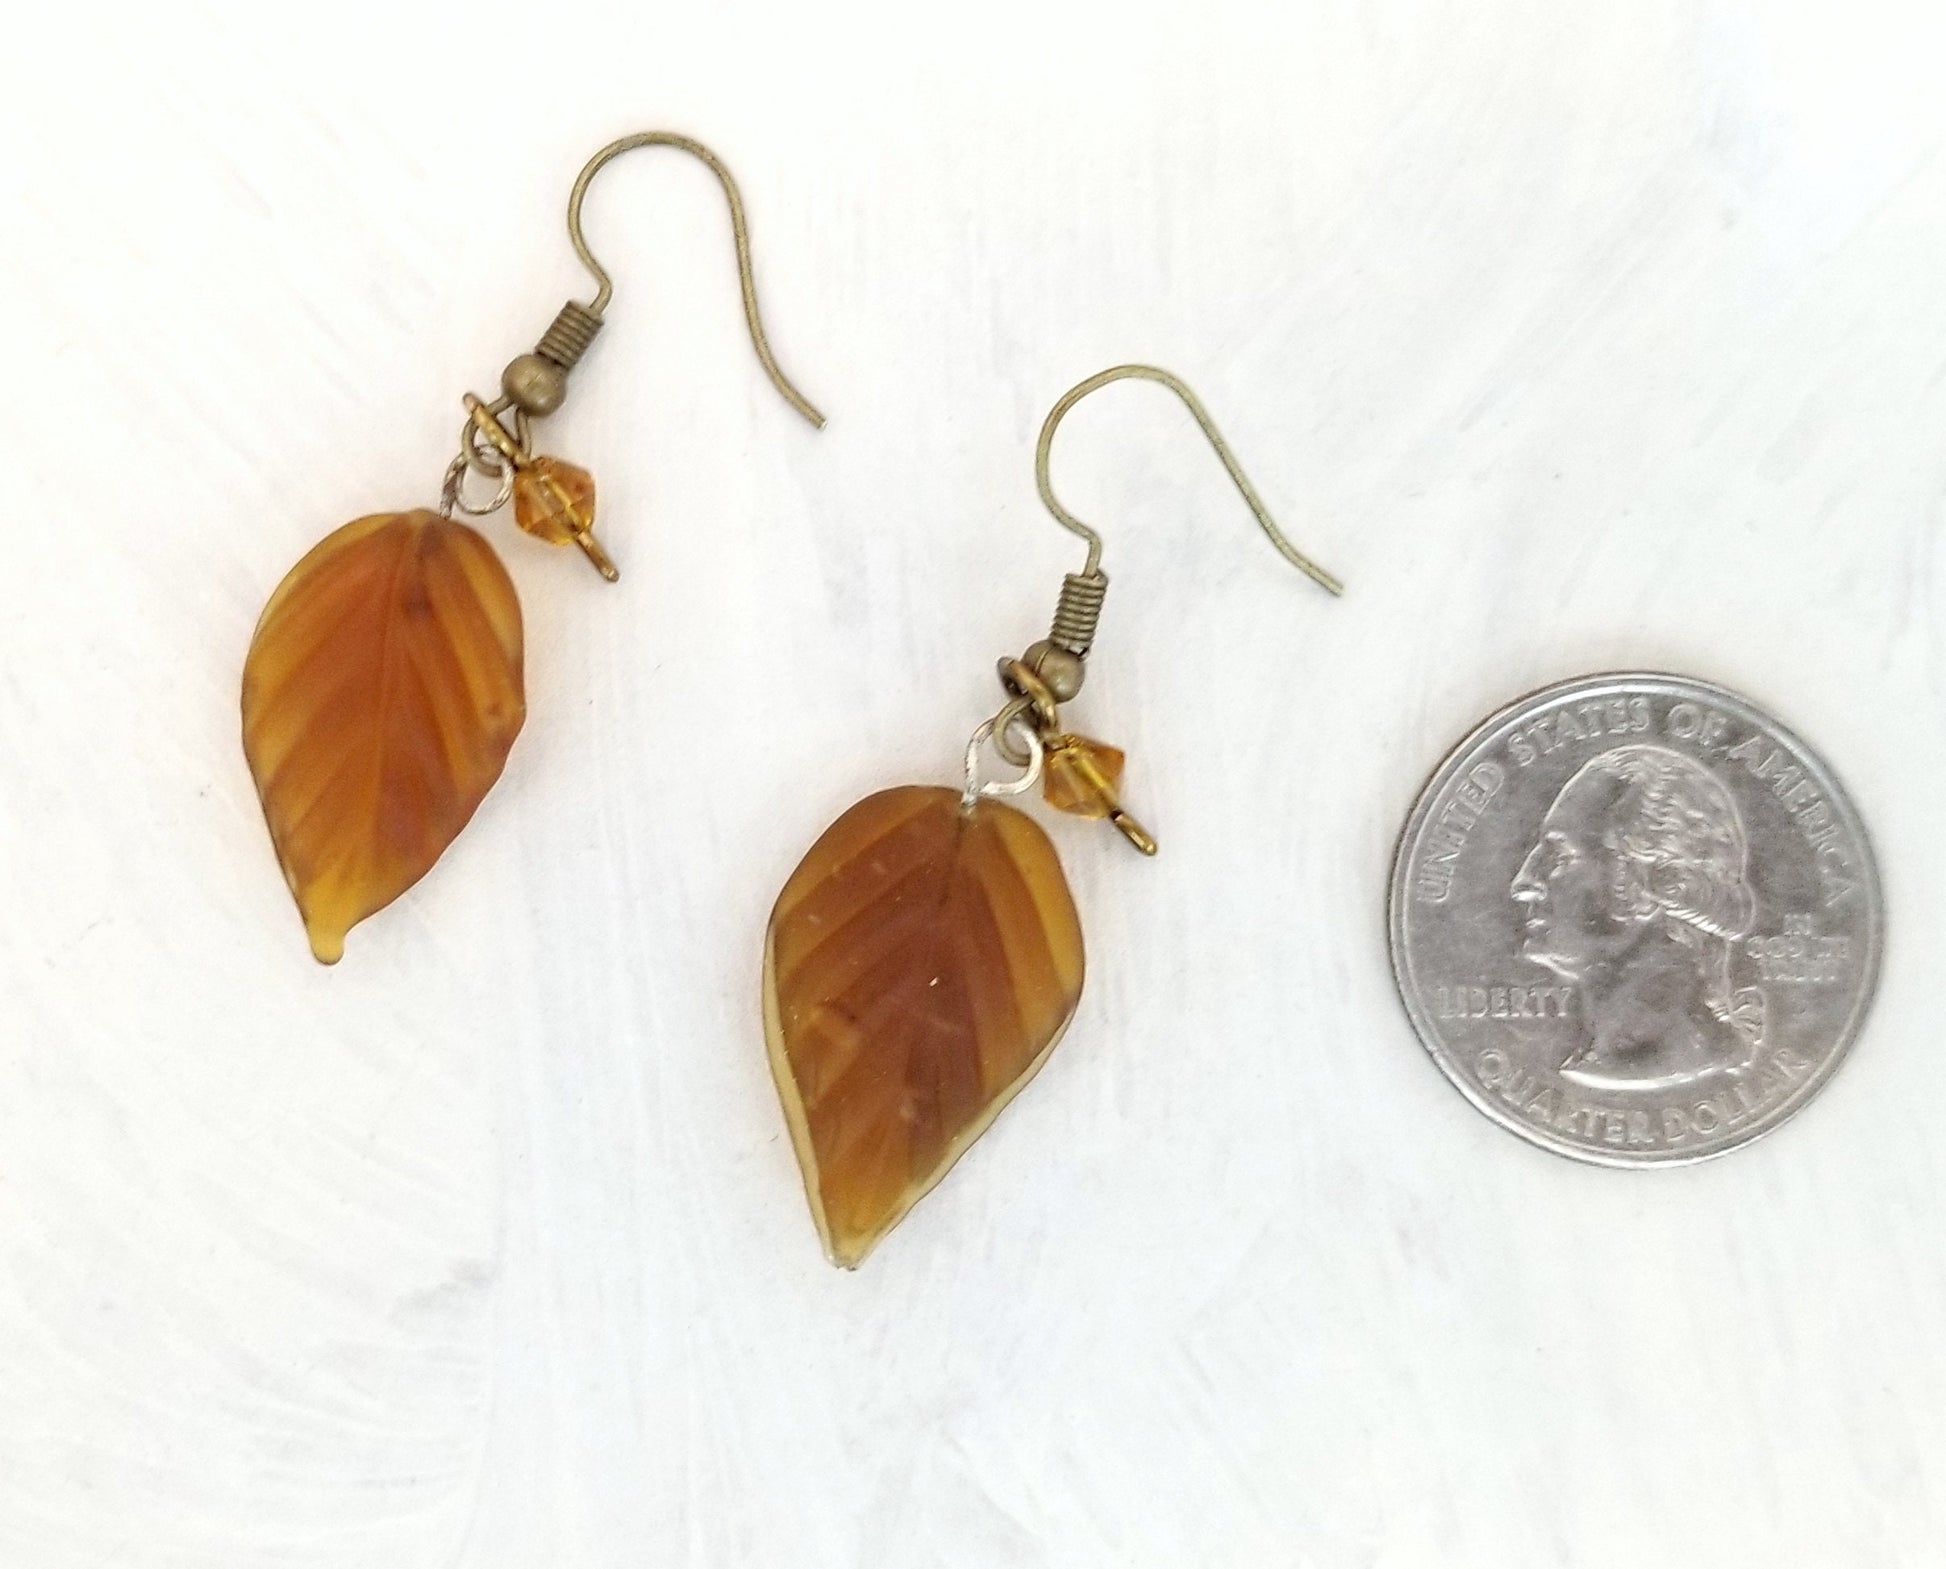 Long Glass Leaf Earrings in Frosted Brown, Wedding, Bridesmaid, Art Nouveau, Belle Époque, Renaissance, Forest, Choice of Closure Types